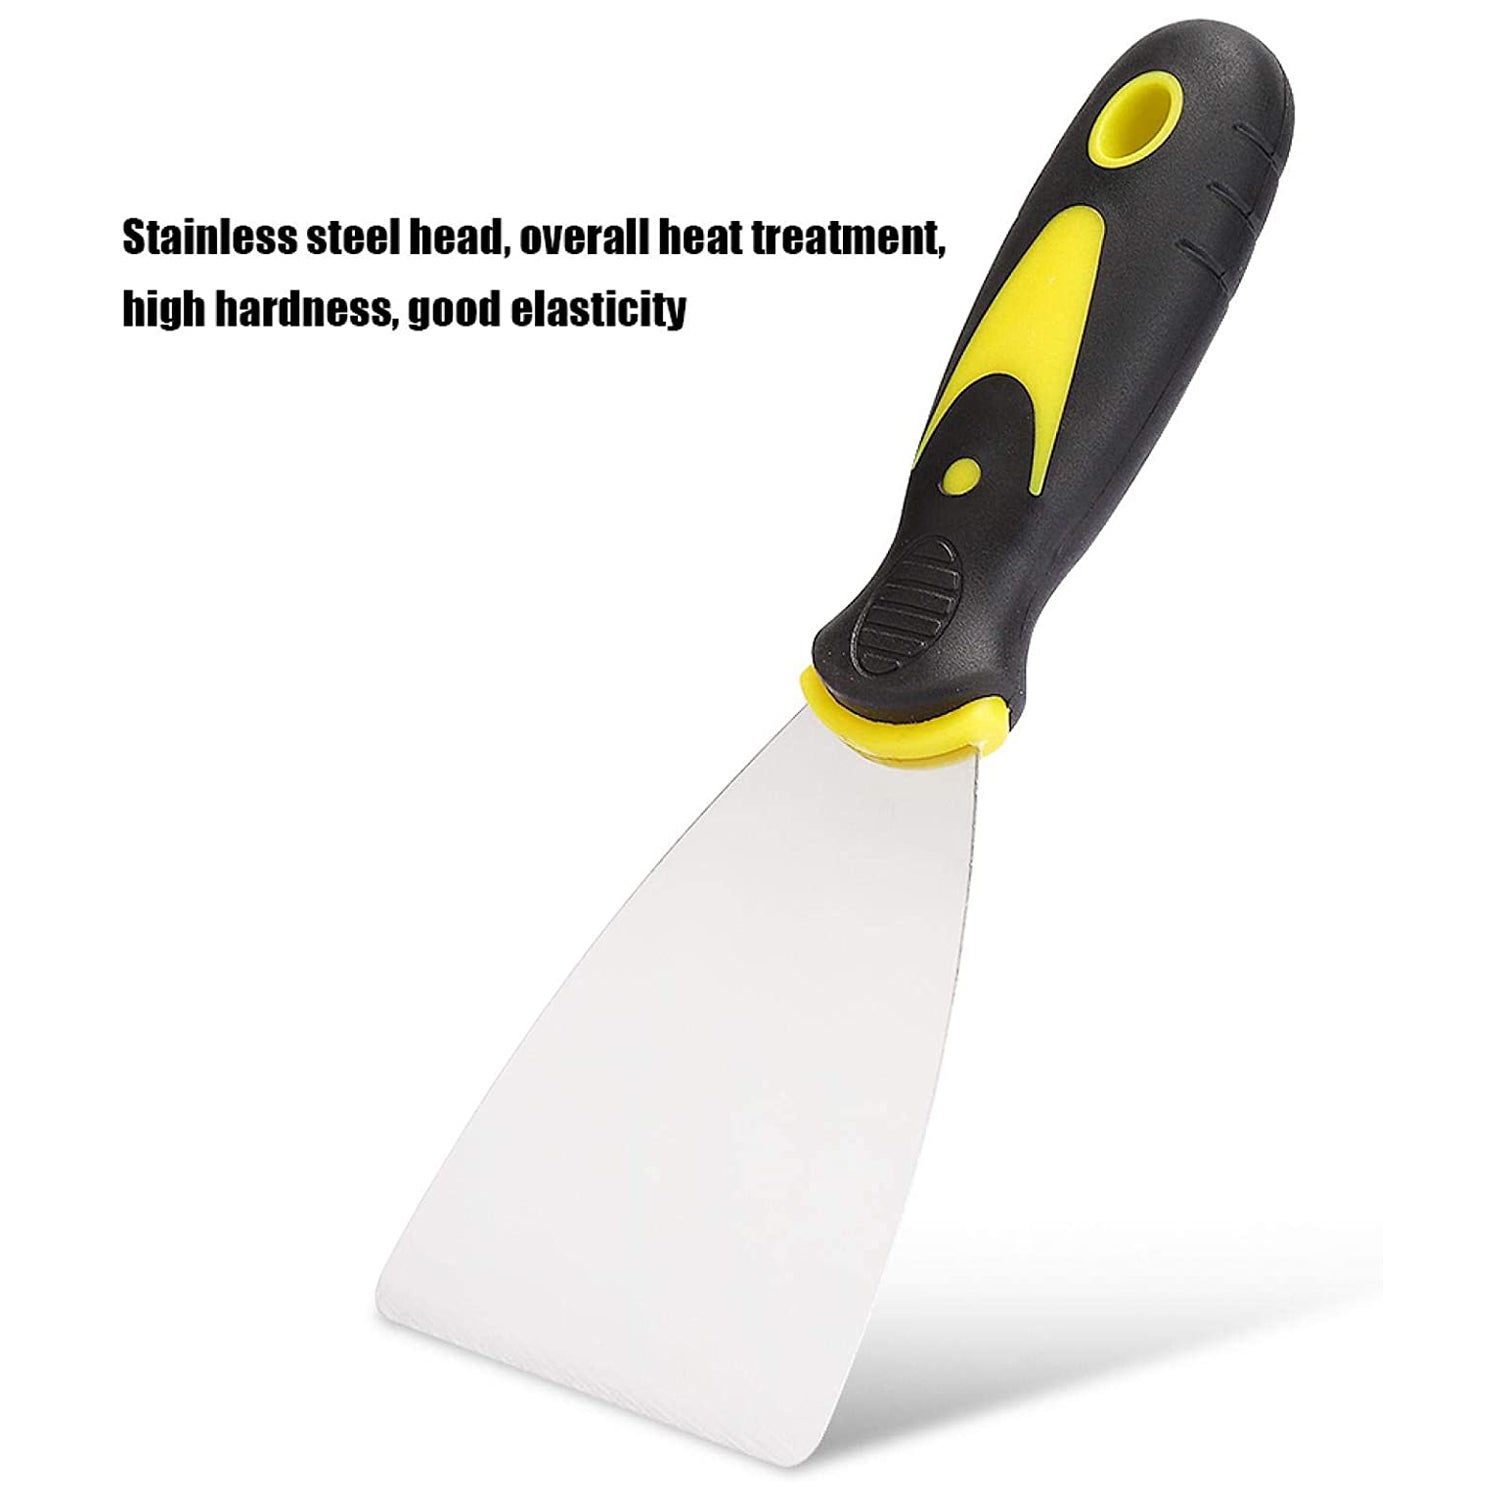 7479 Putty Knife Set with Soft Rubber Handle for Drywall, Putty, Decals, Baking, Patching and Painting